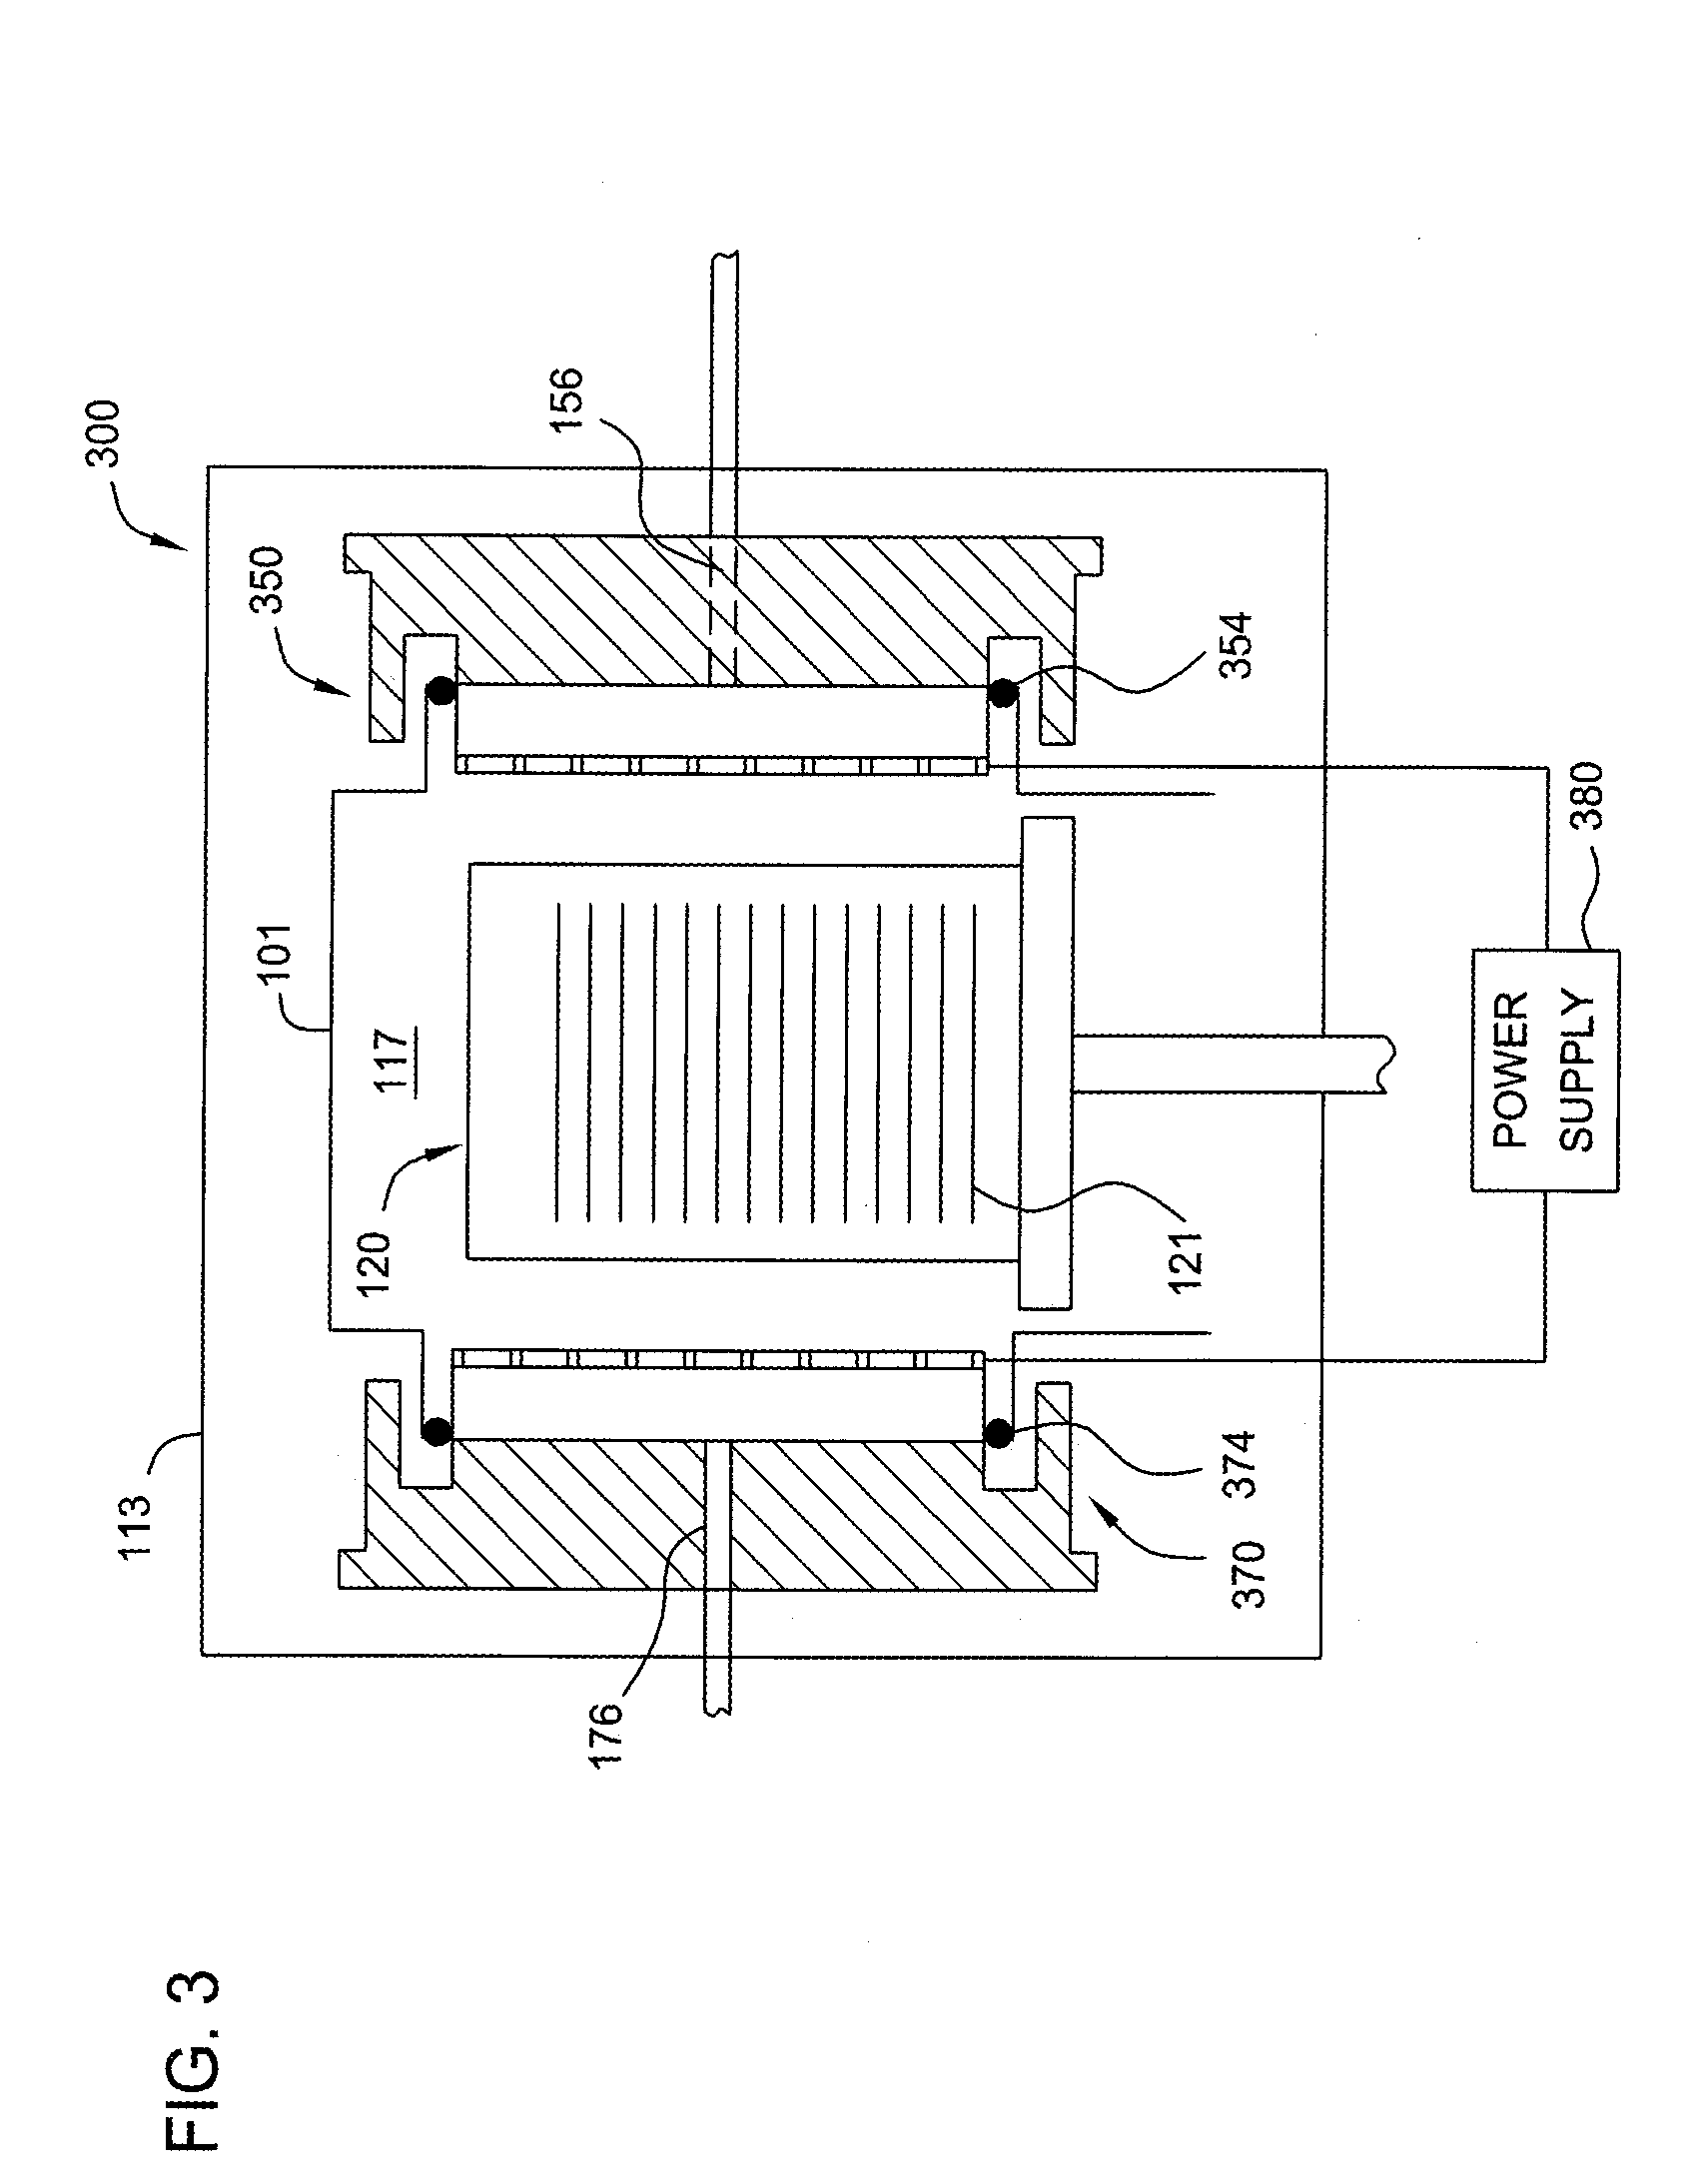 Method and apparatus for photo-excitation of chemicals for atomic layer deposition of dielectric film